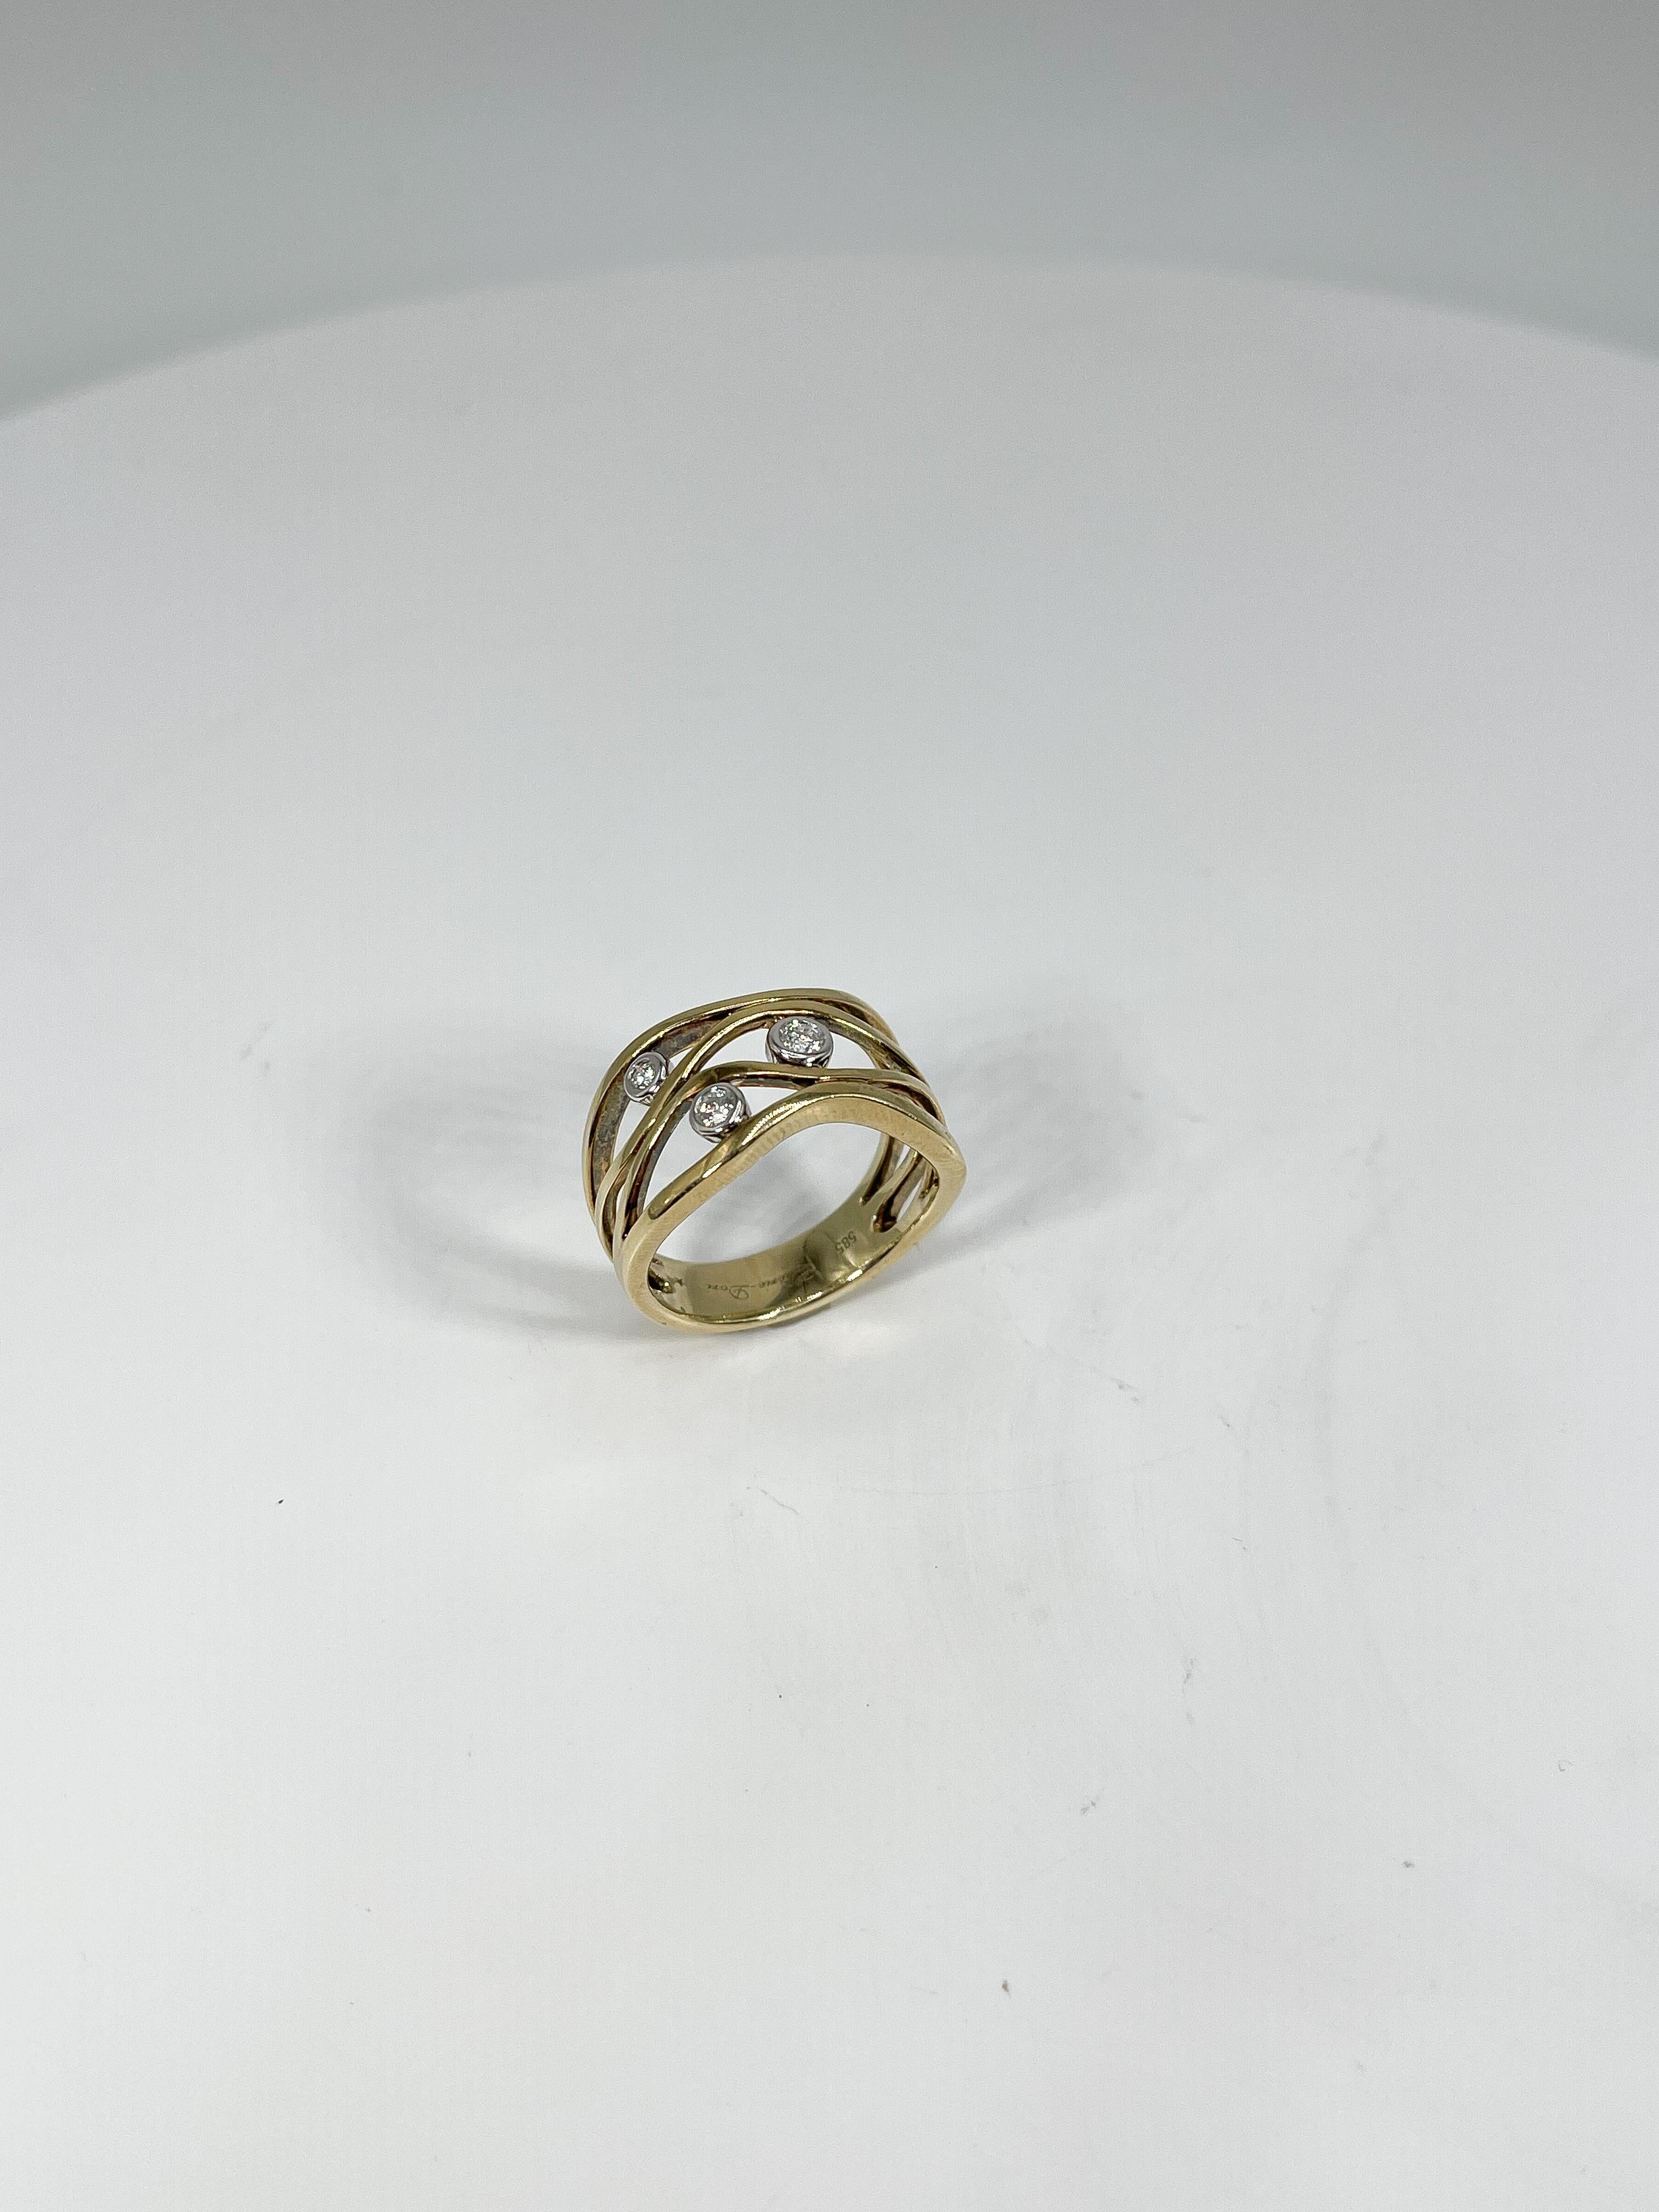 14k two toned .13 CTW diamond ring. The ring has a yellow gold wavy design with 3 round diamonds in a white gold bezel setting. The width of the ring is 10.8 mm, has a weight of 5.64 grams, and the size of the ring is a 6 1/2. 